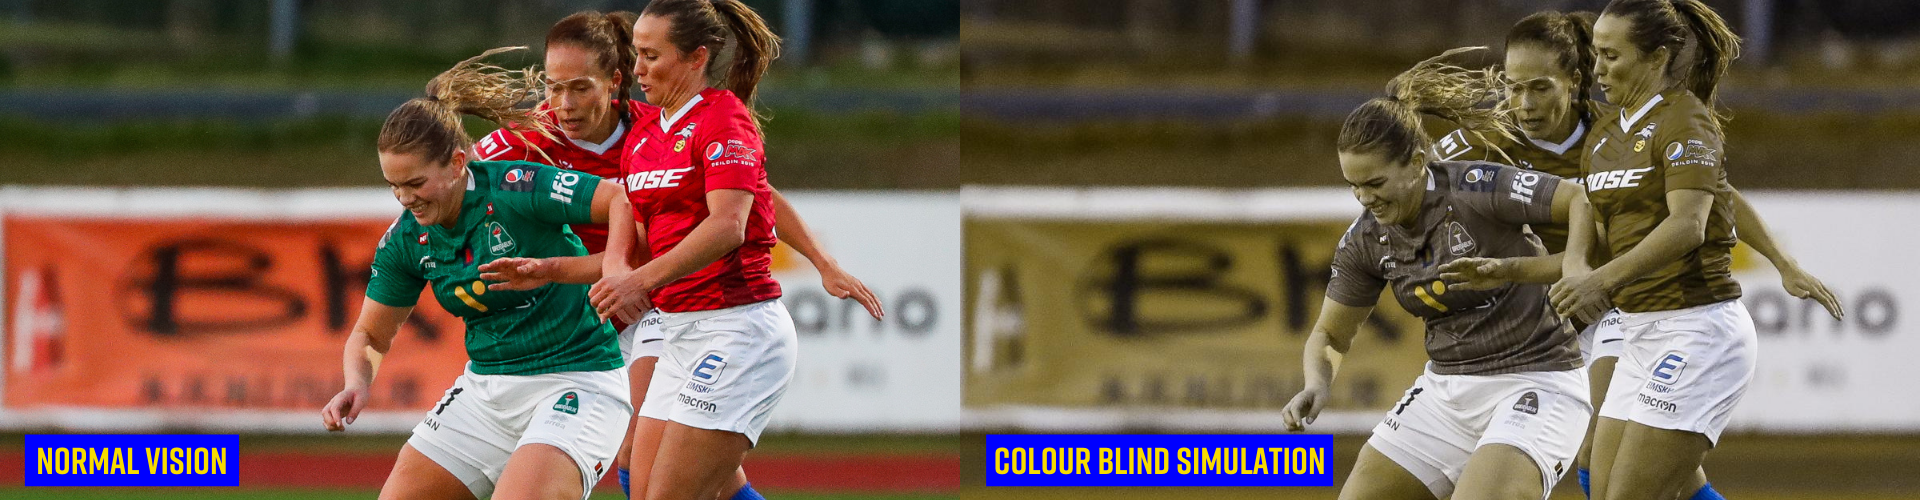 Best Resources for Colour Blind Awareness in Sports header